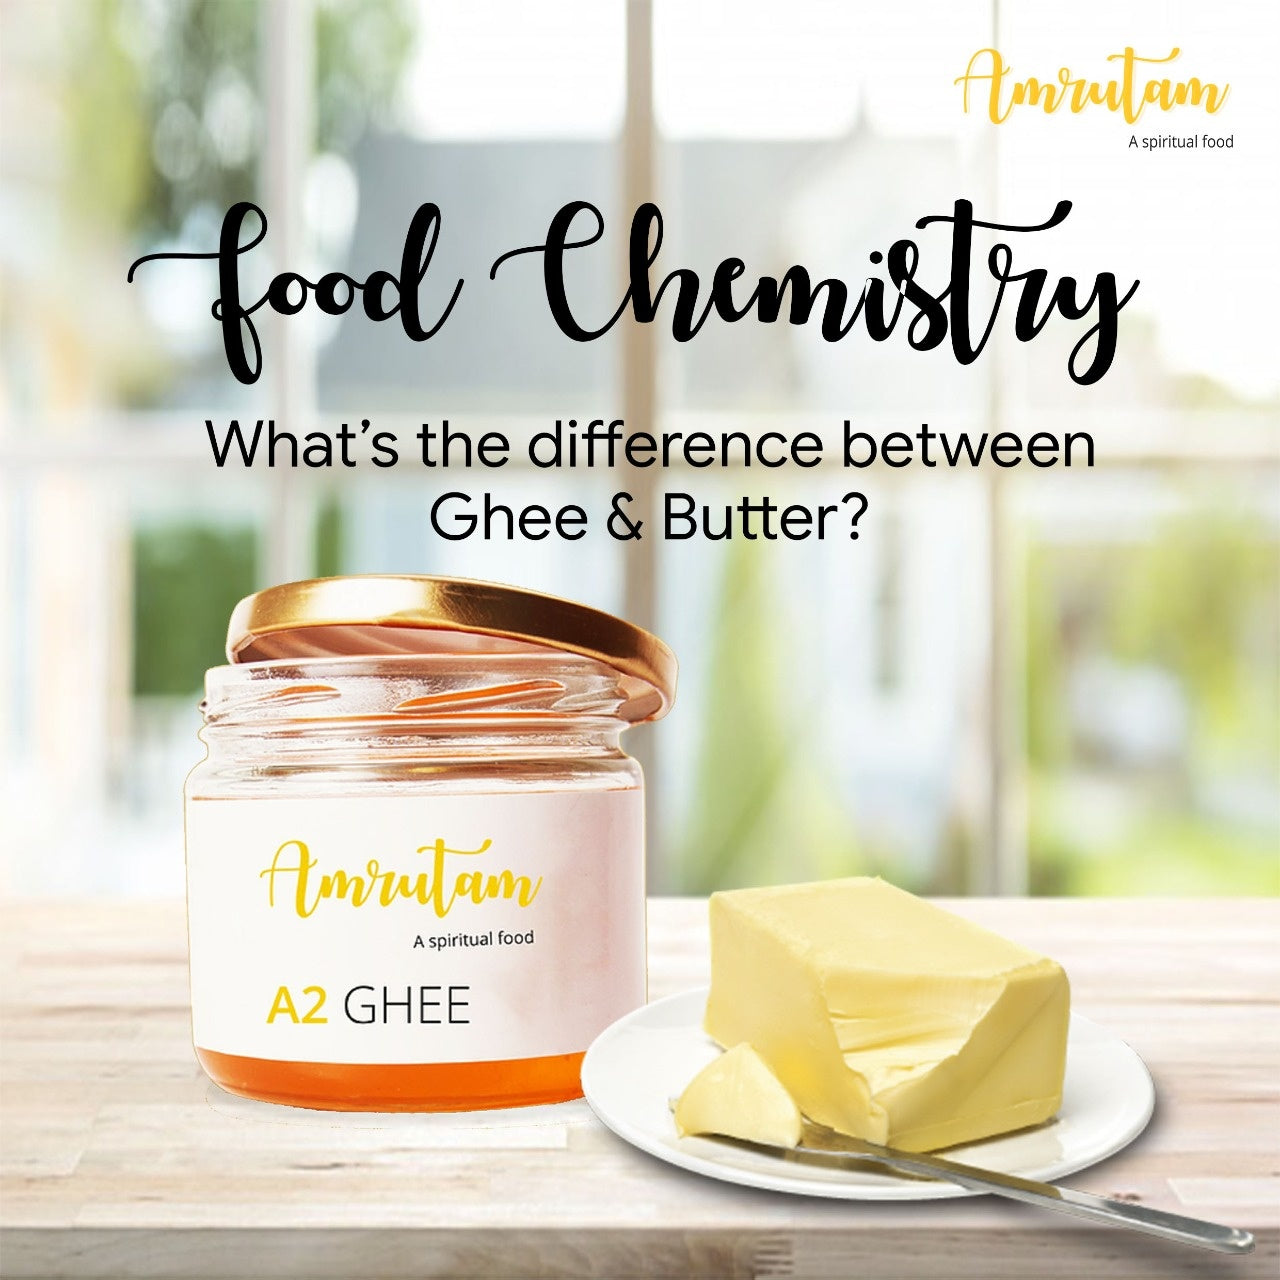 Ghee vs Butter: What is the difference?